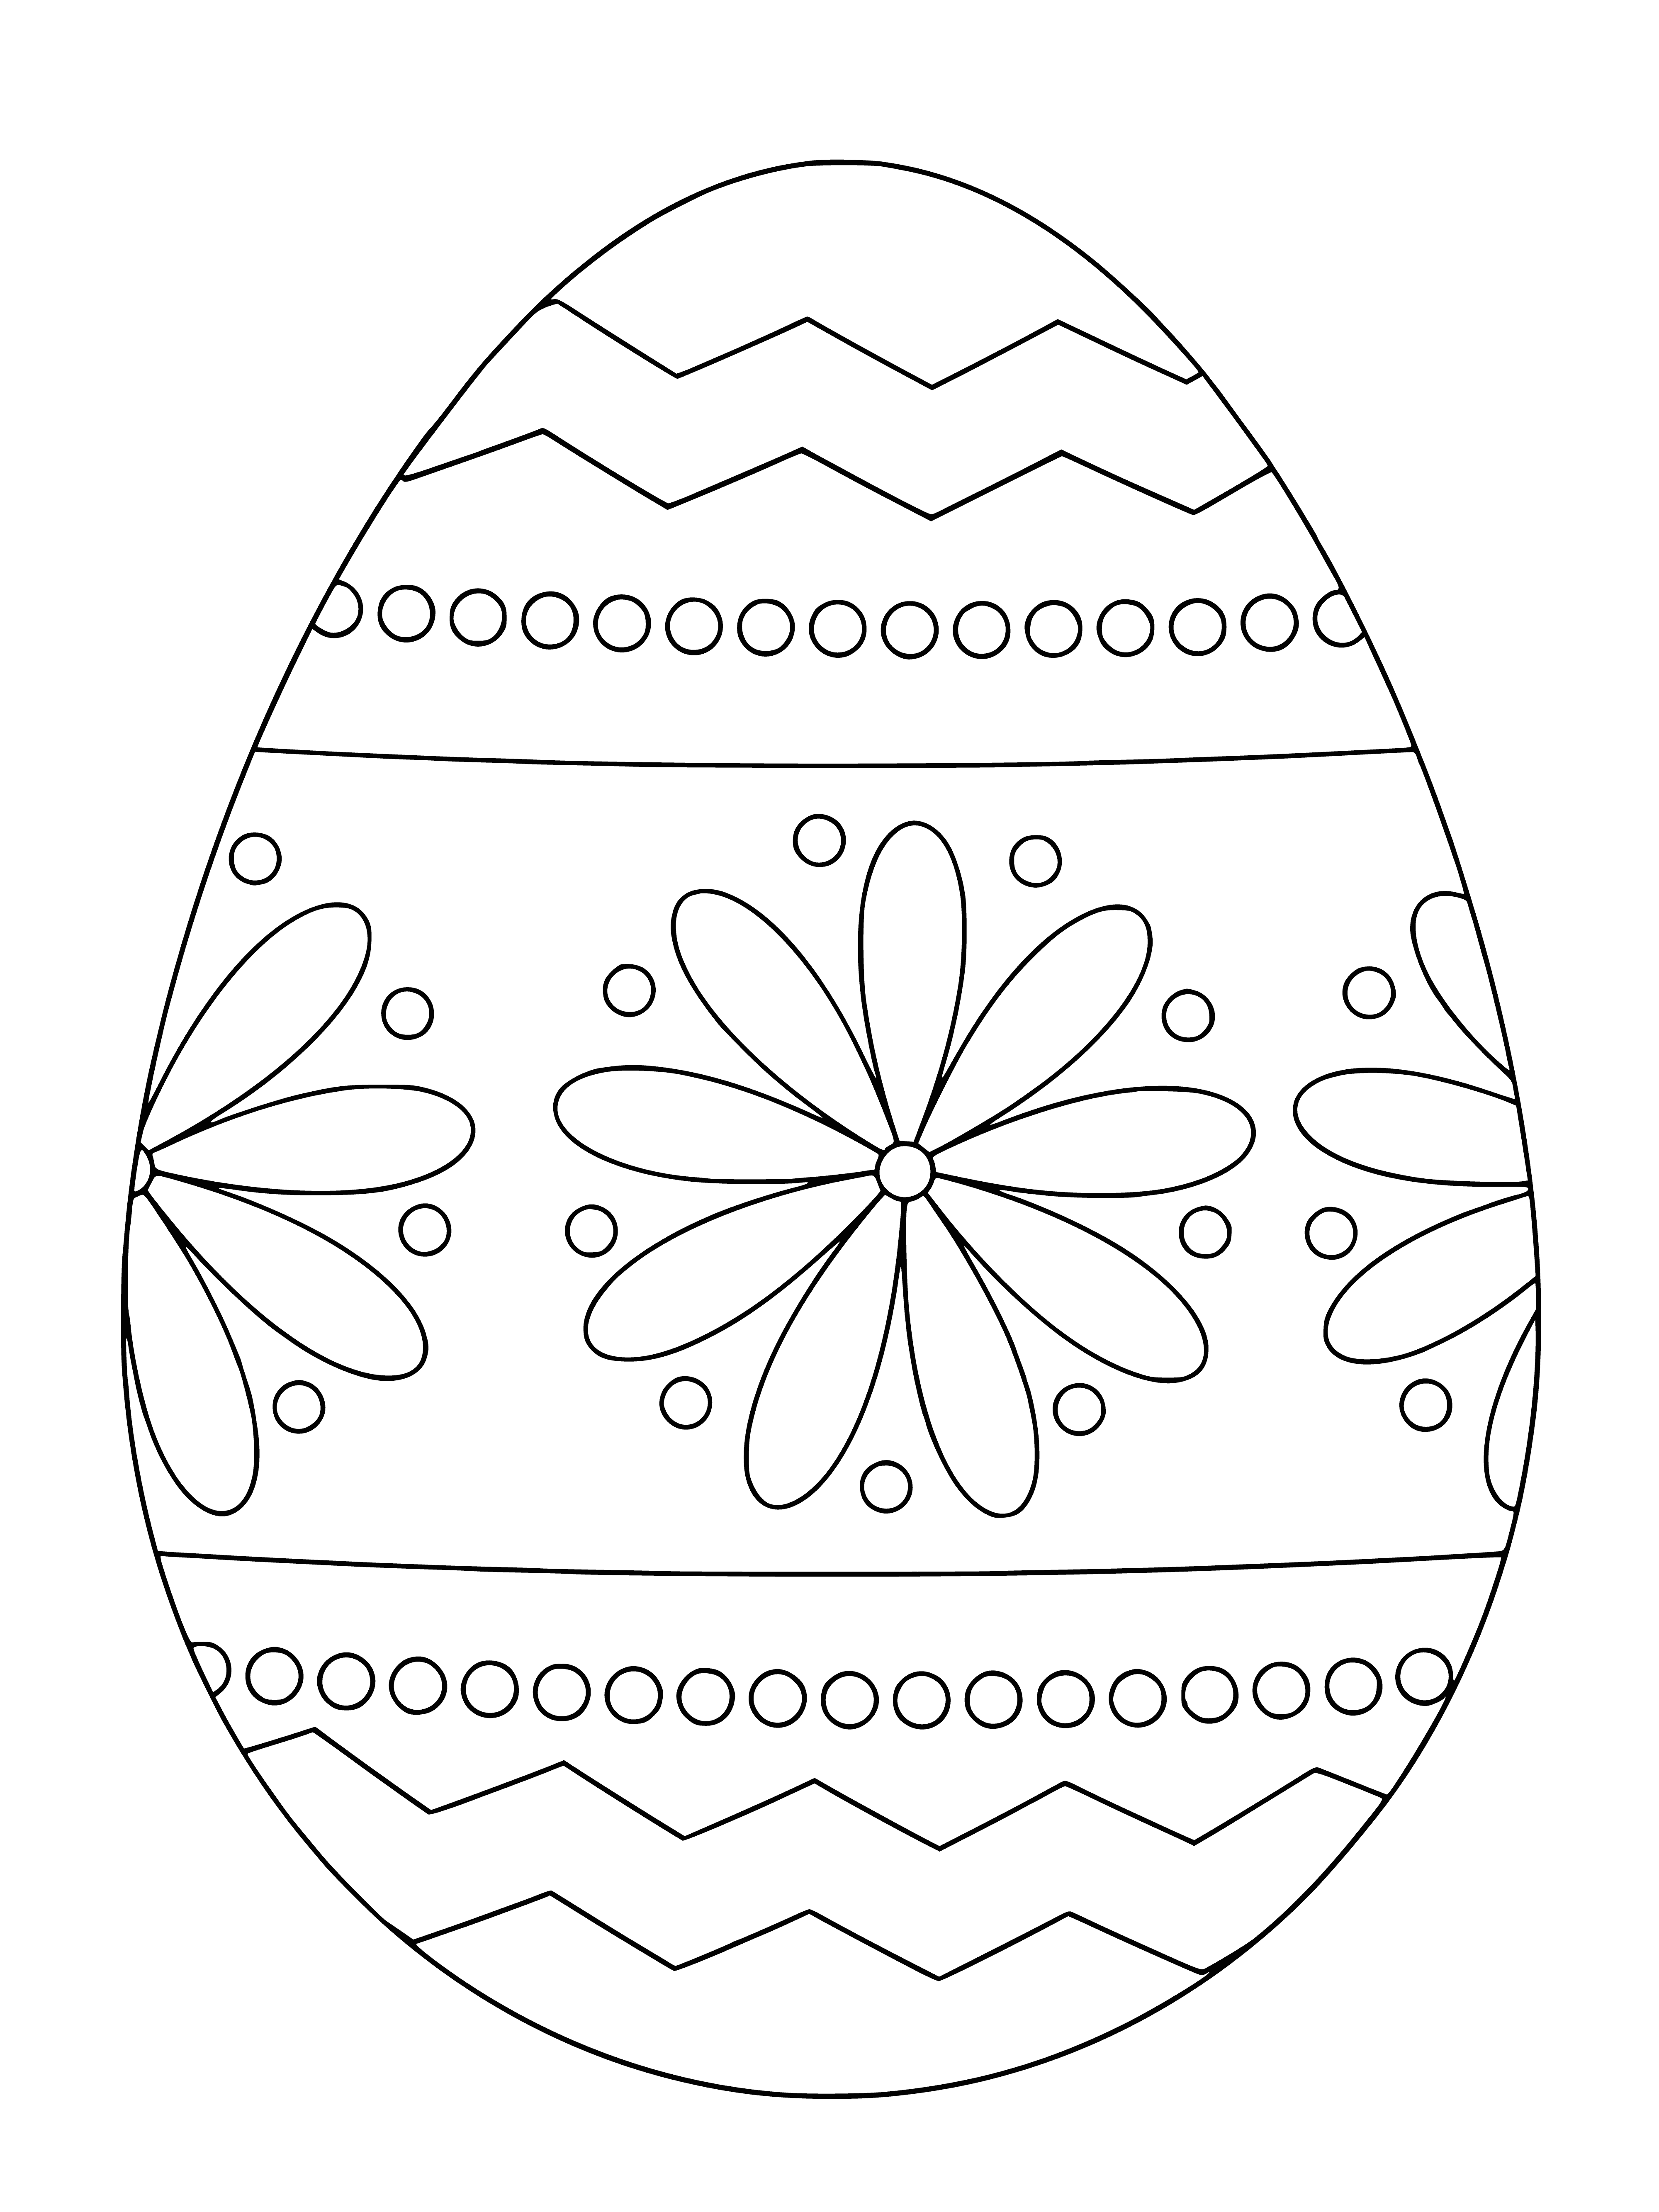 coloring page: 2 pink Easter eggs in nest - 1 has blue spots, other has yellow. Also a green one! #Easter